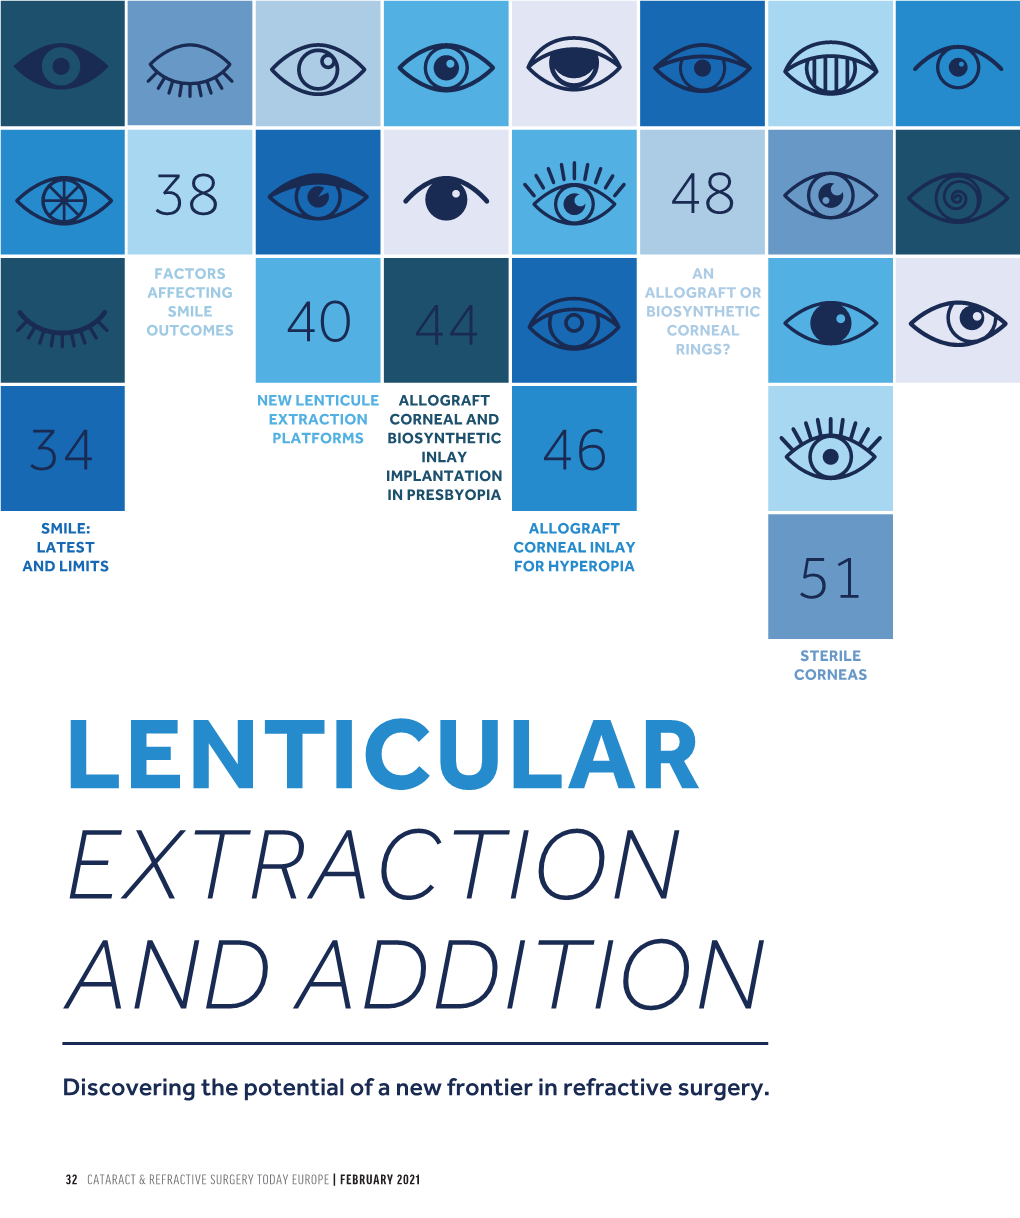 Lenticular Extraction and Addition